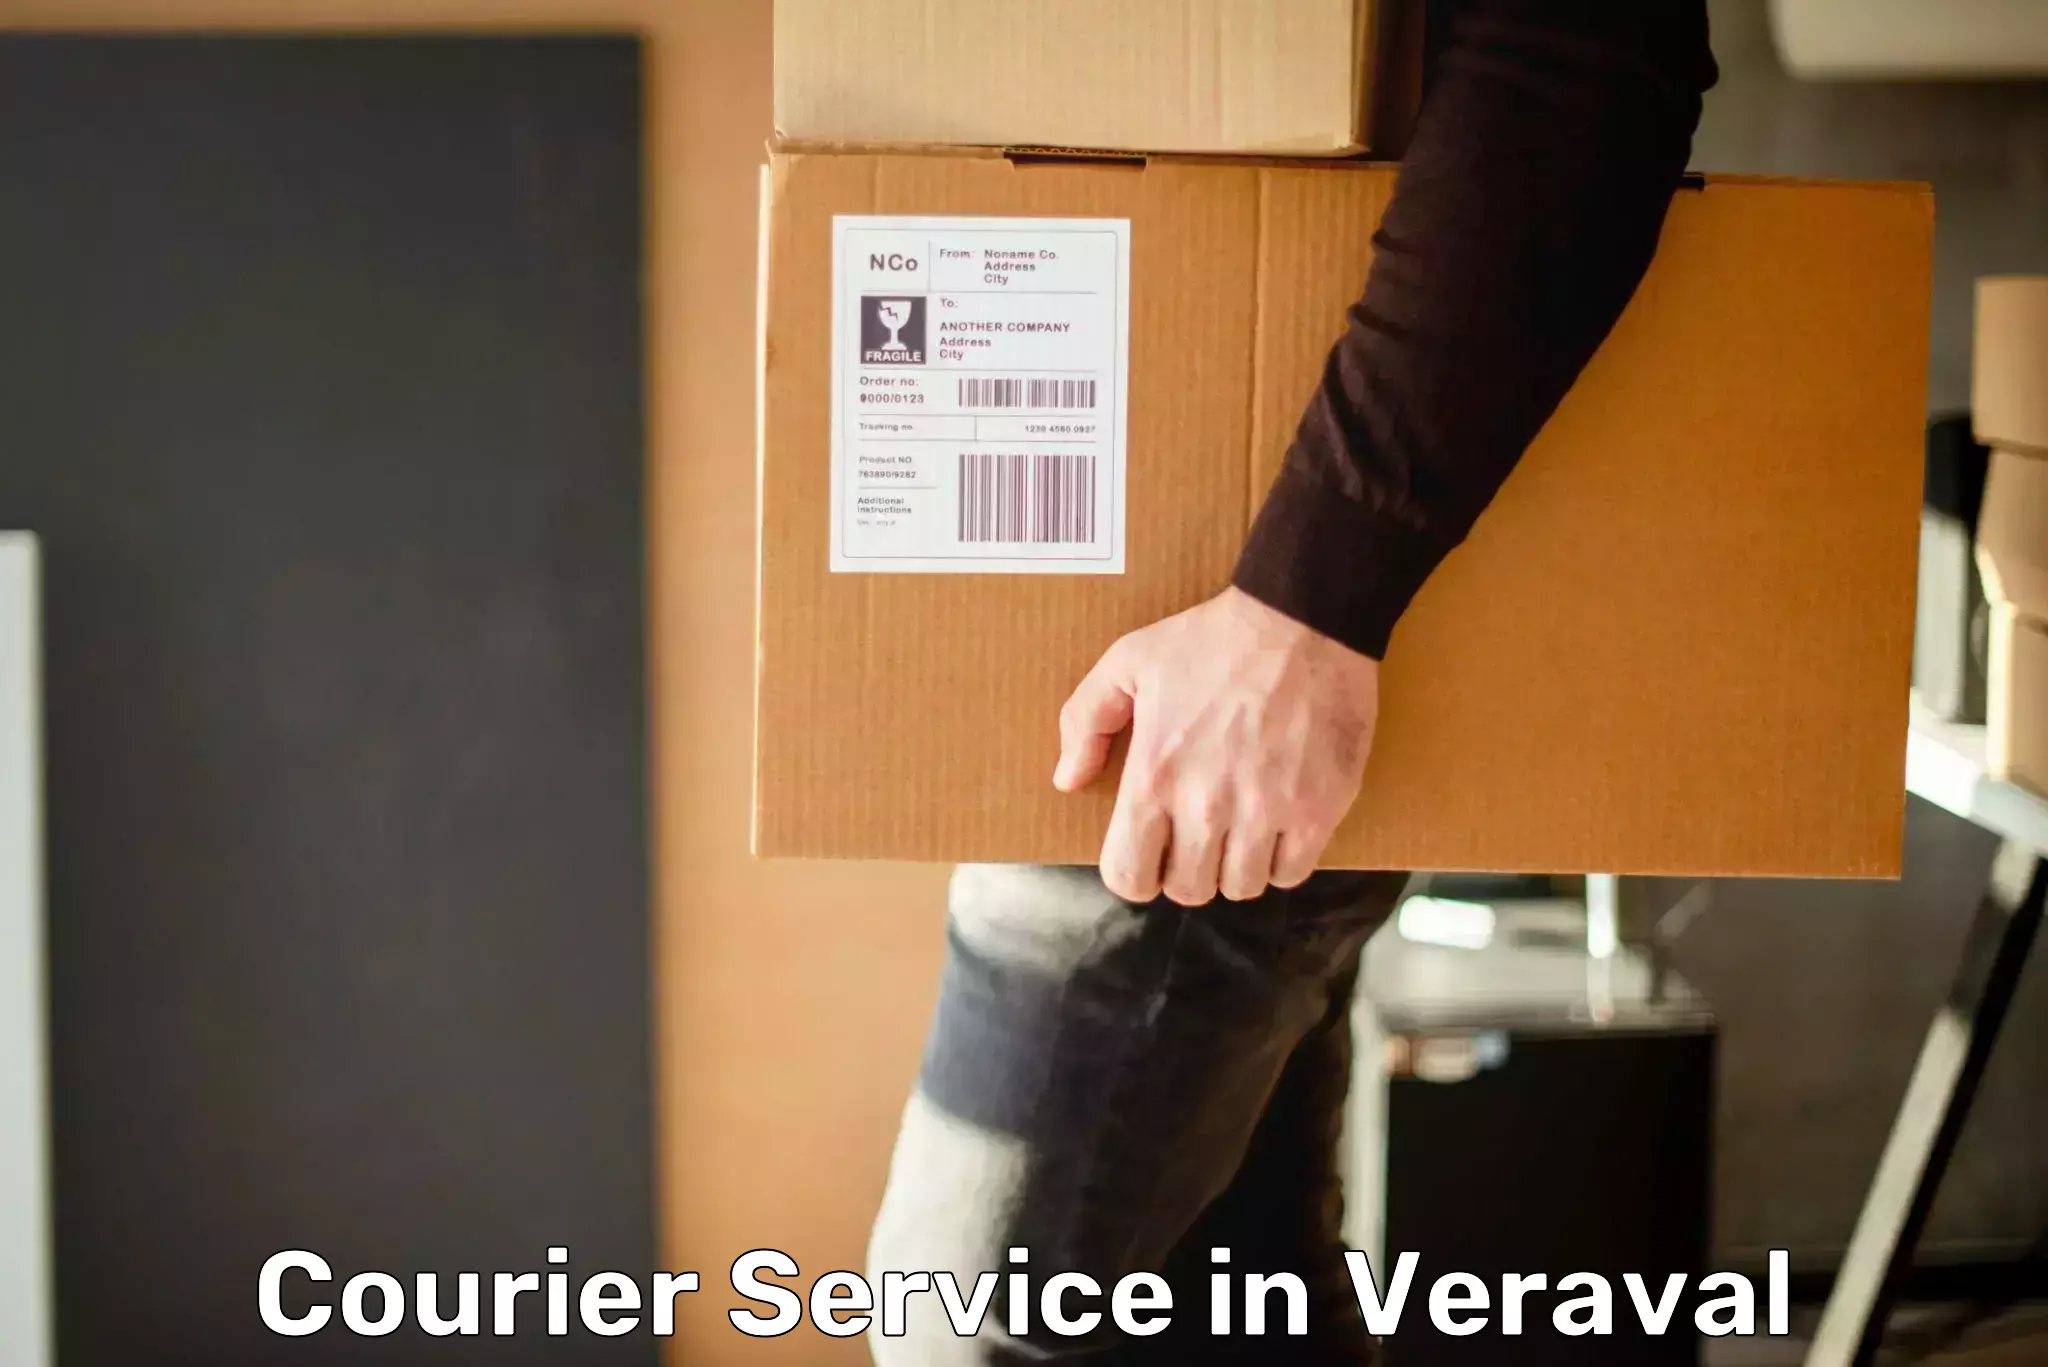 On-time delivery services in Veraval